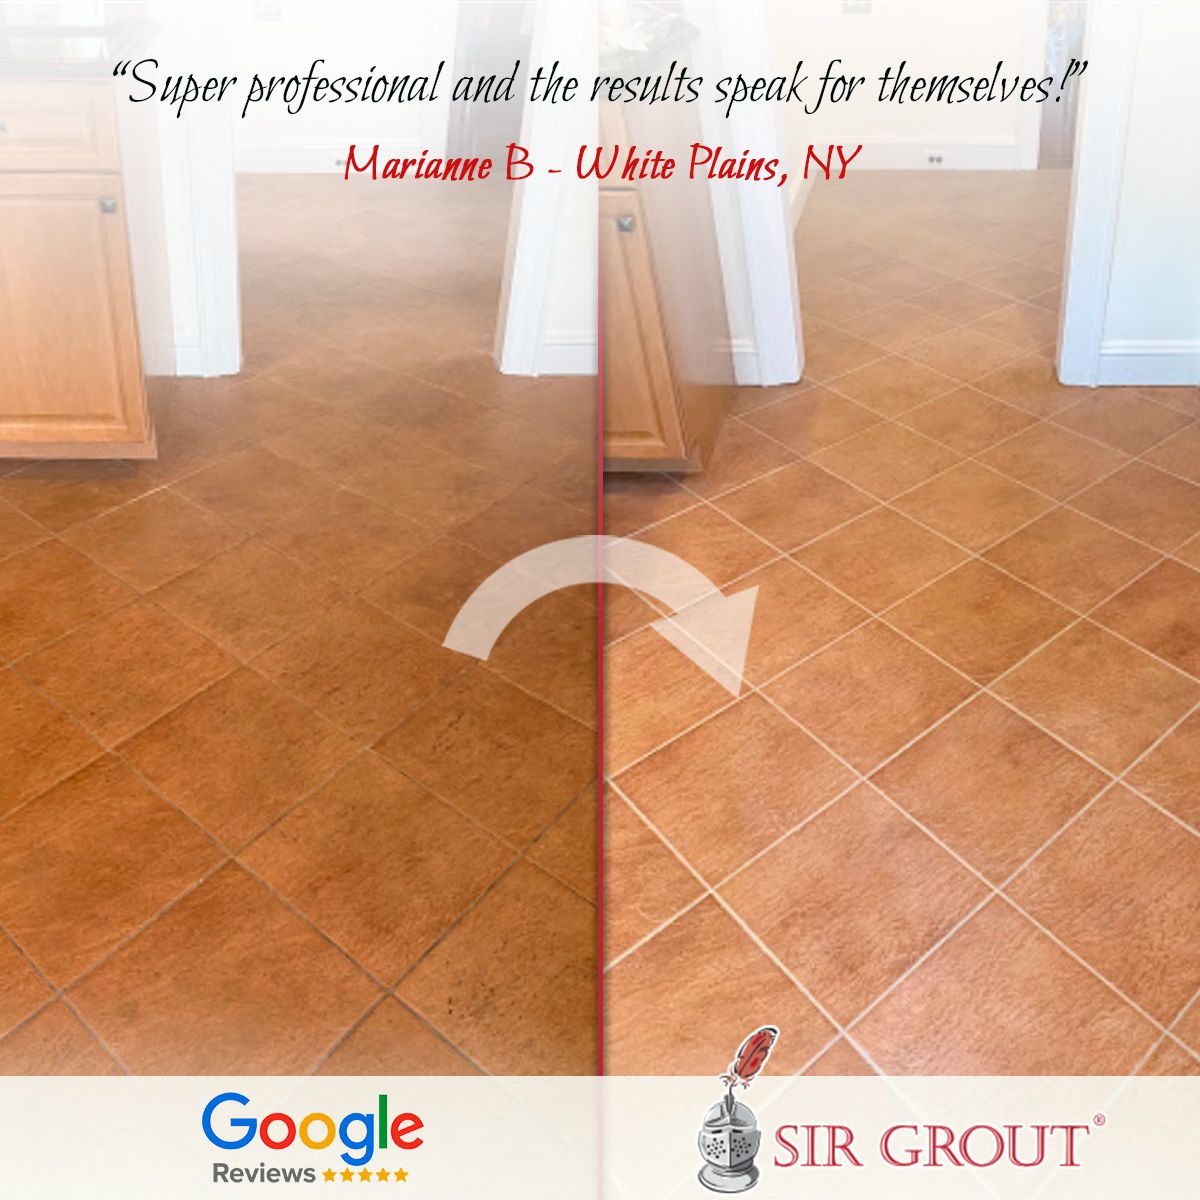 Super professional and the results speak for themselves!